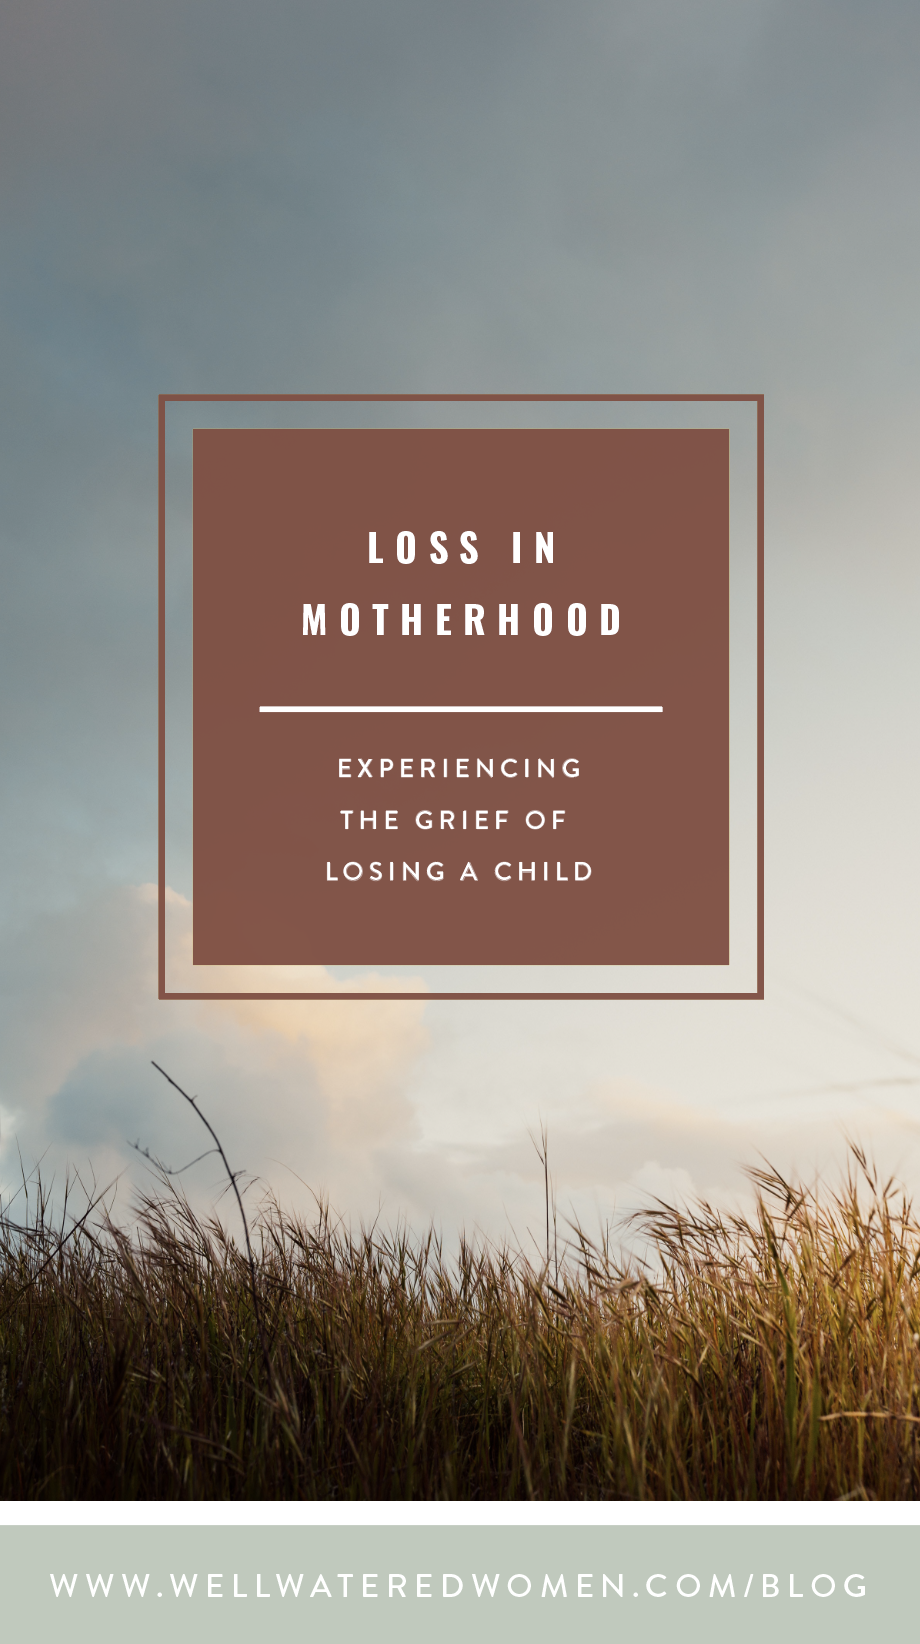 Well-Watered Women Blog on Loss in Motherhood-The Grief of Losing a Child